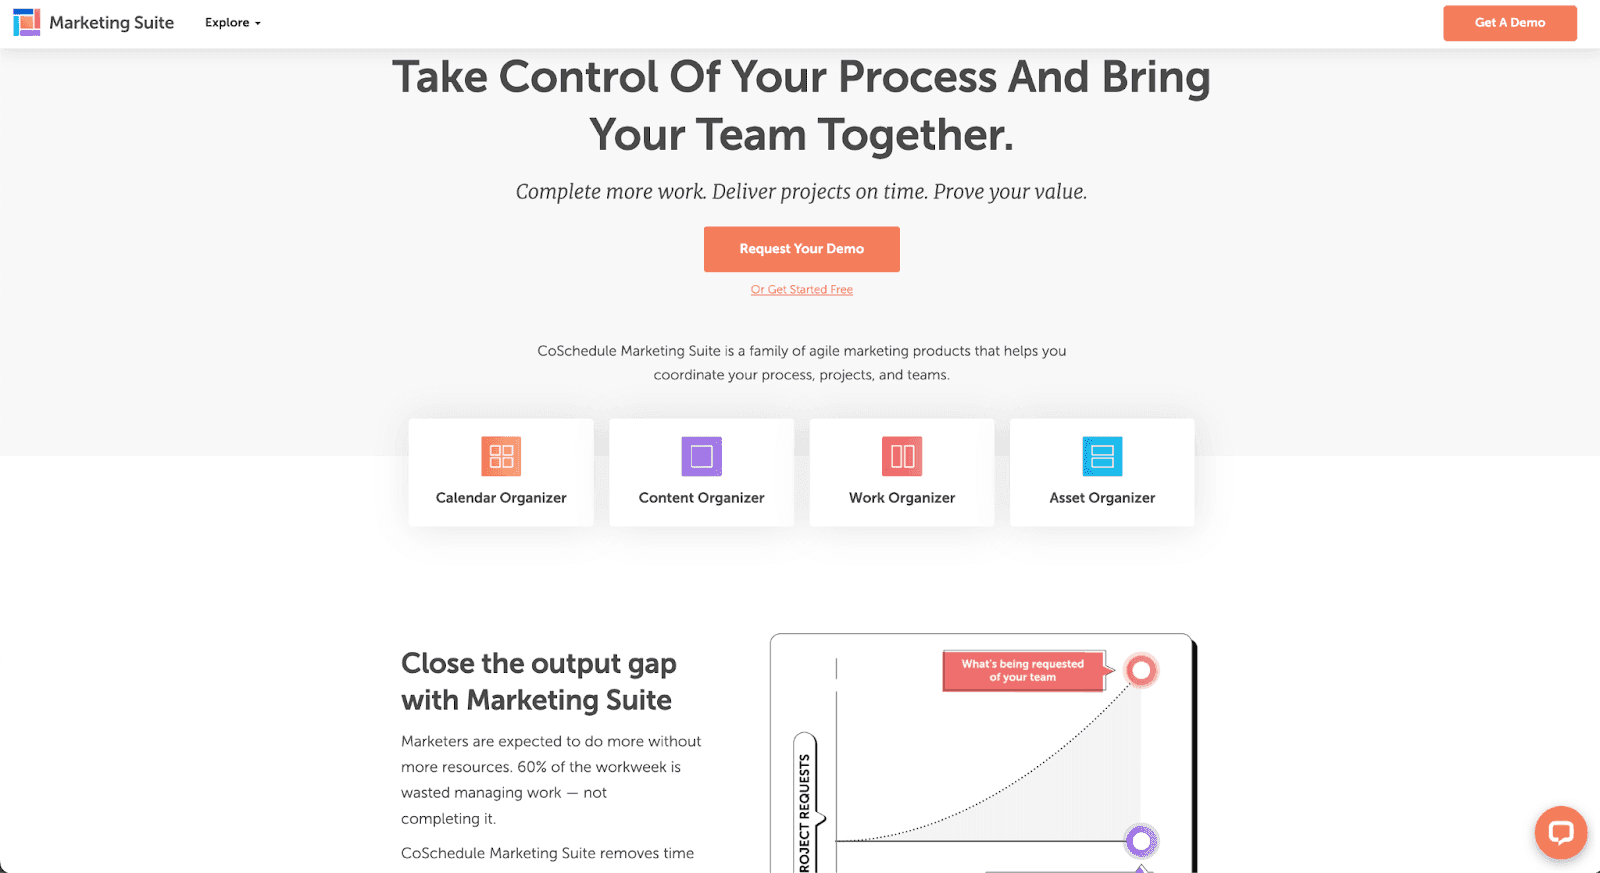 Marketing suite by CoSchedule used for marketing management 